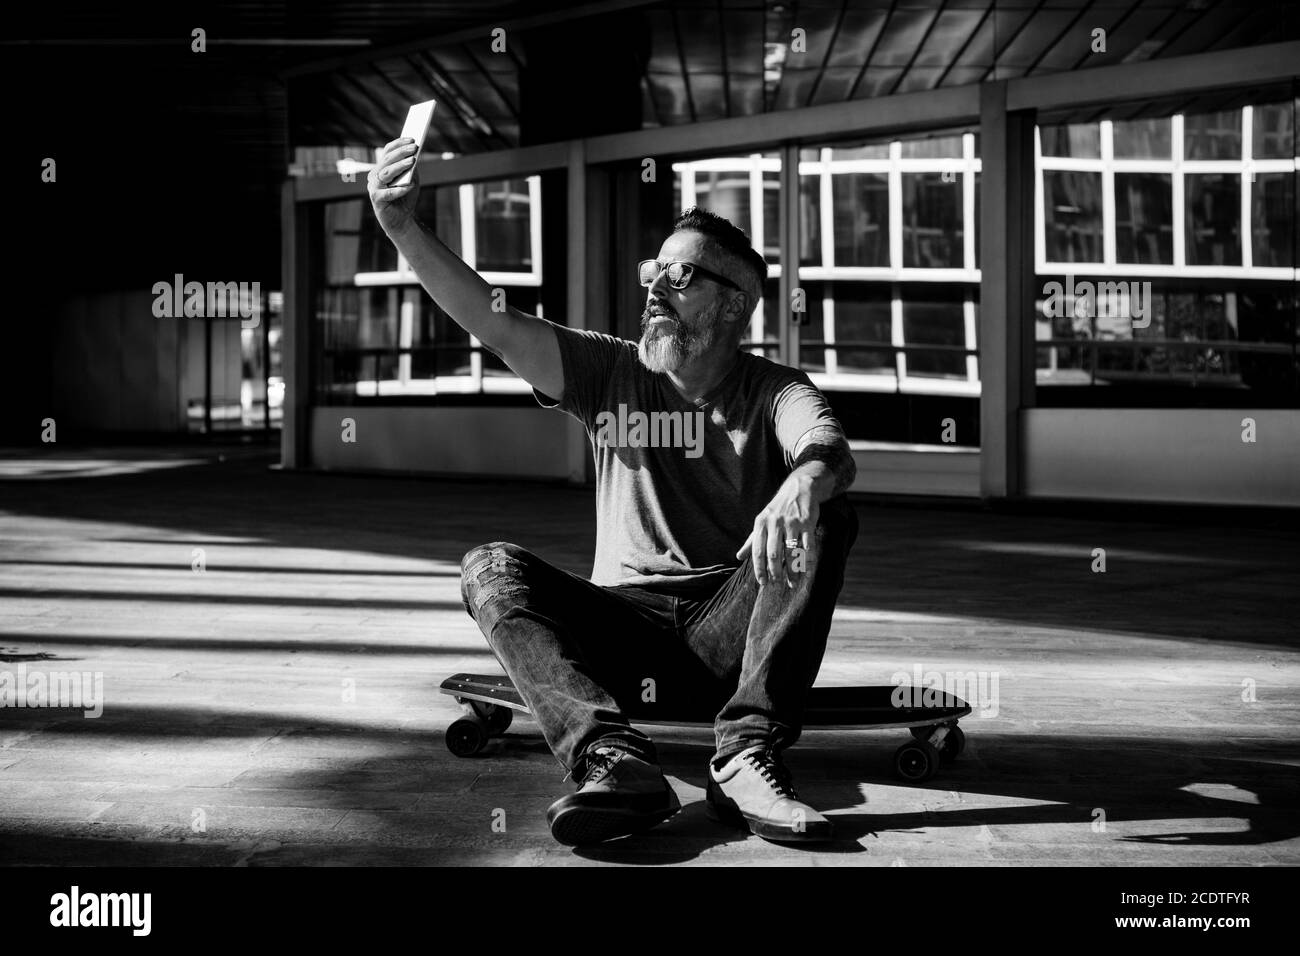 Black and white image of skater taking a selfi on a skateboard Stock Photo